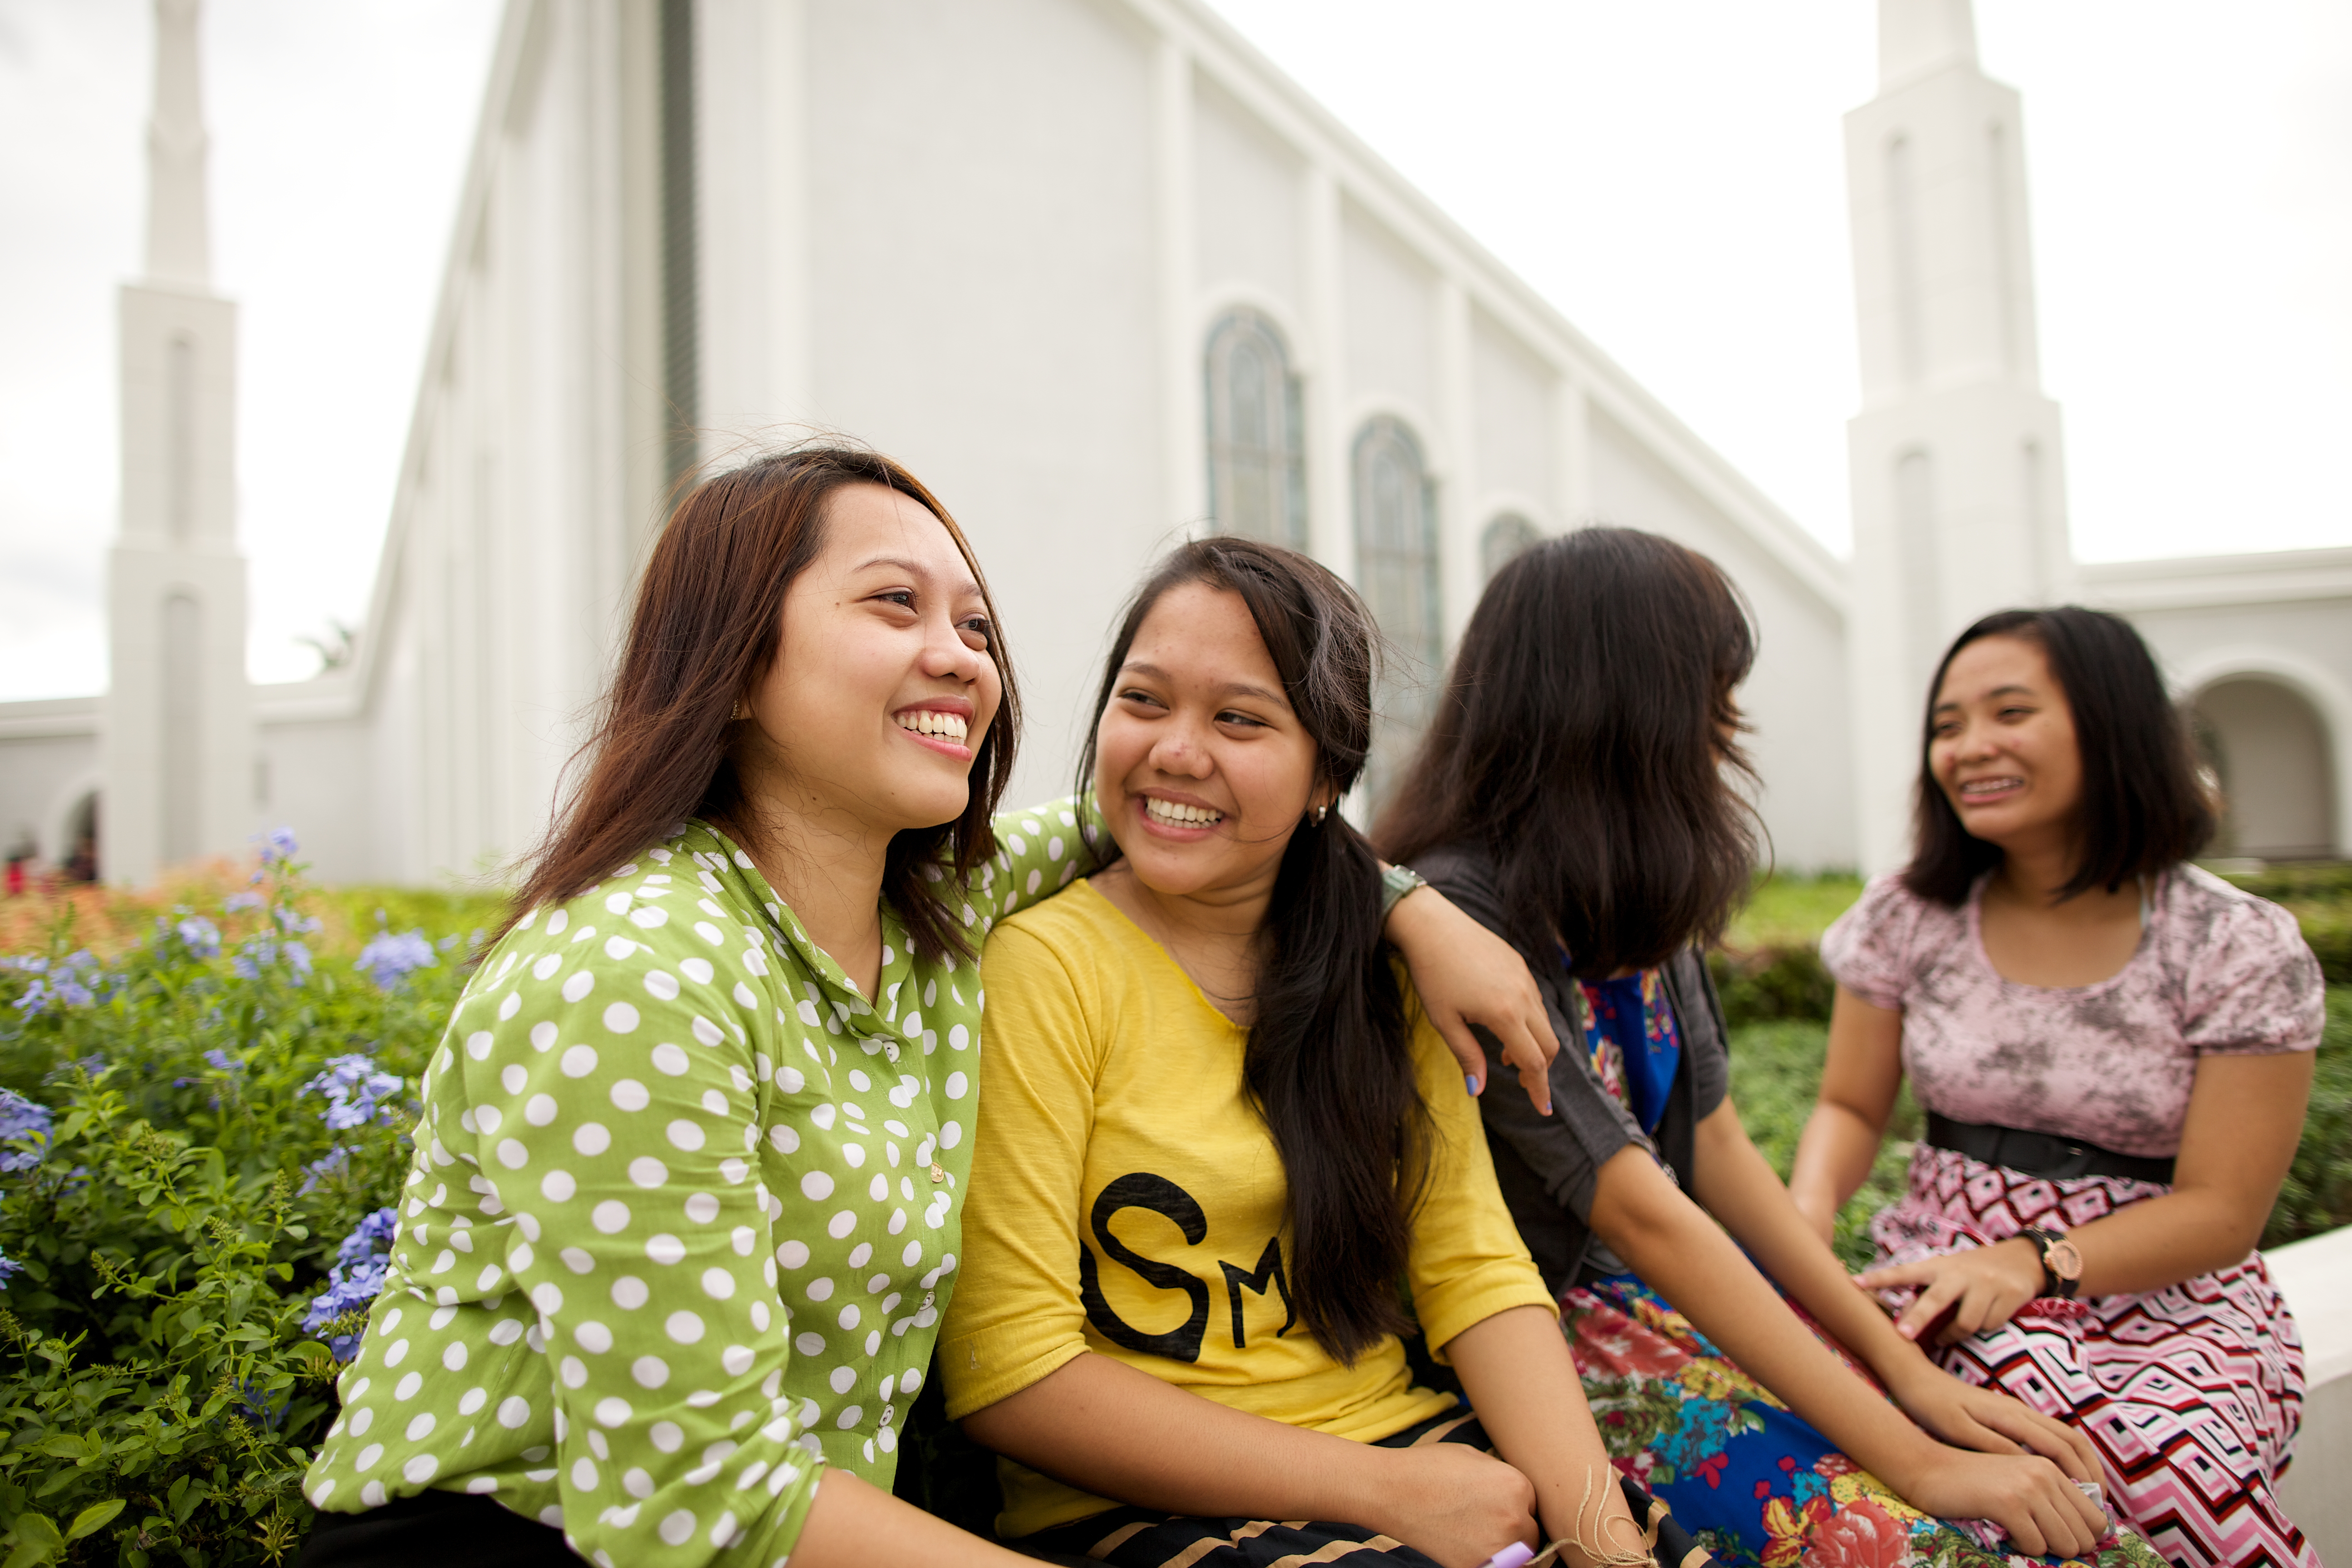 A young woman putting her arm around another young woman’s shoulders, with two other women sitting nearby outside the Manila Philippines Temple.